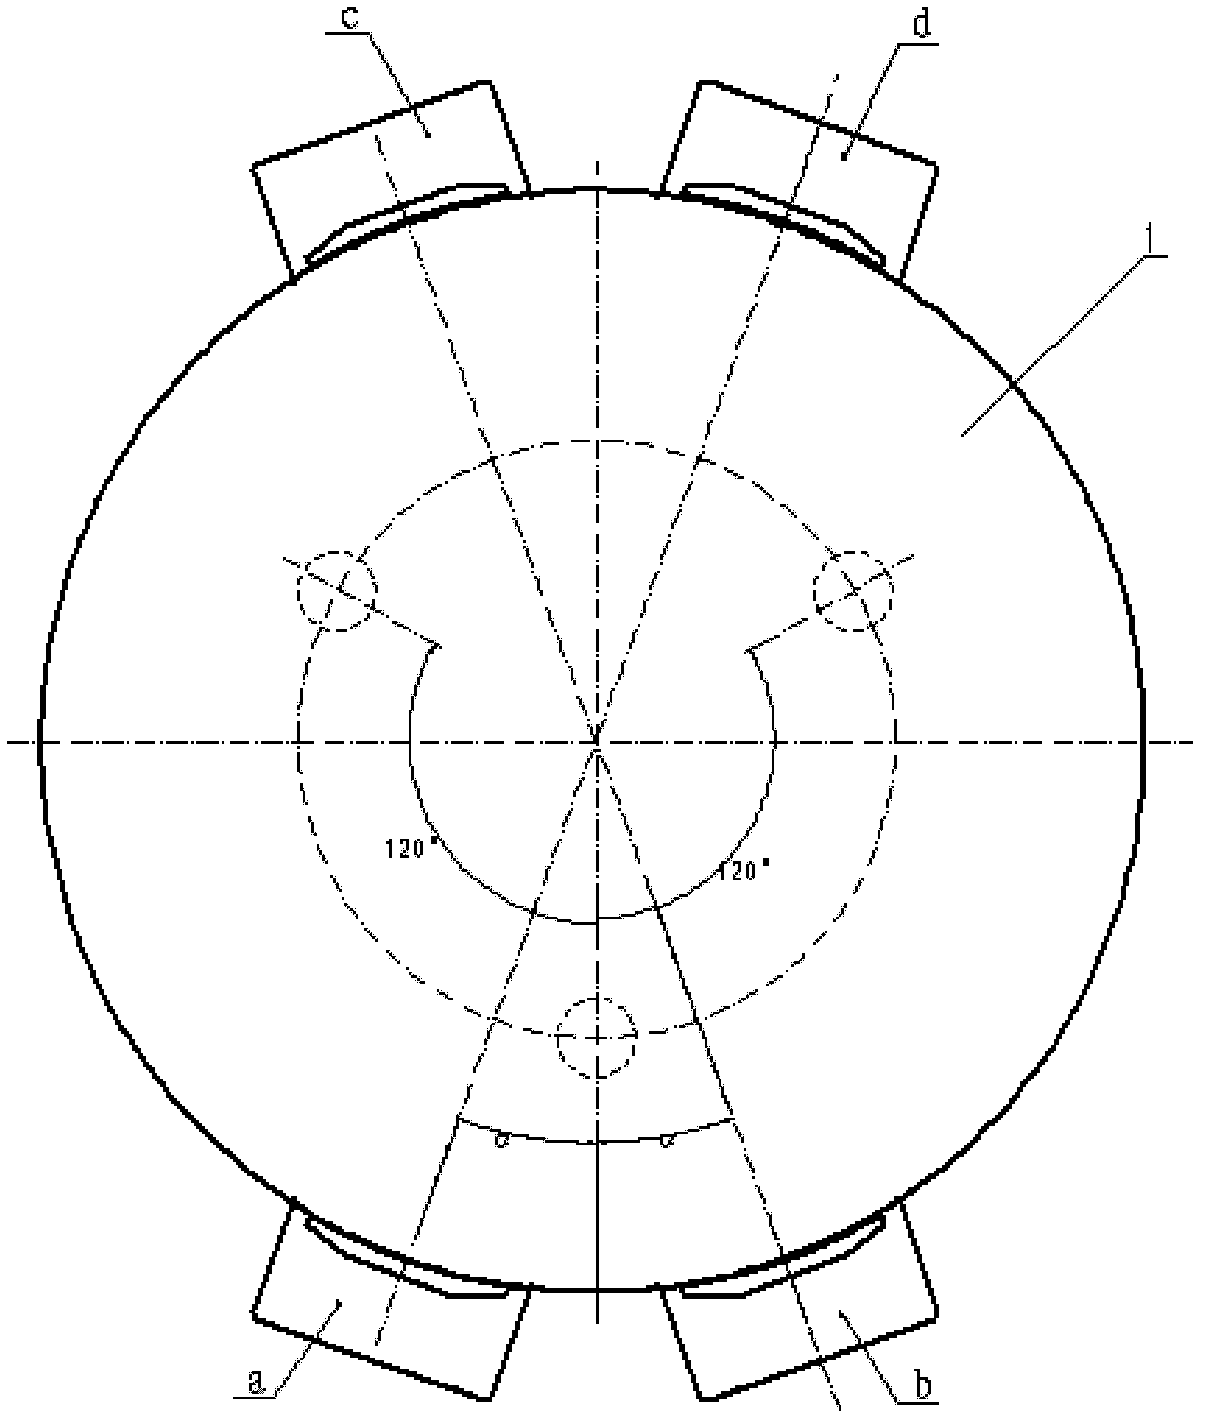 Composite primary reflector supporting device for large telescope